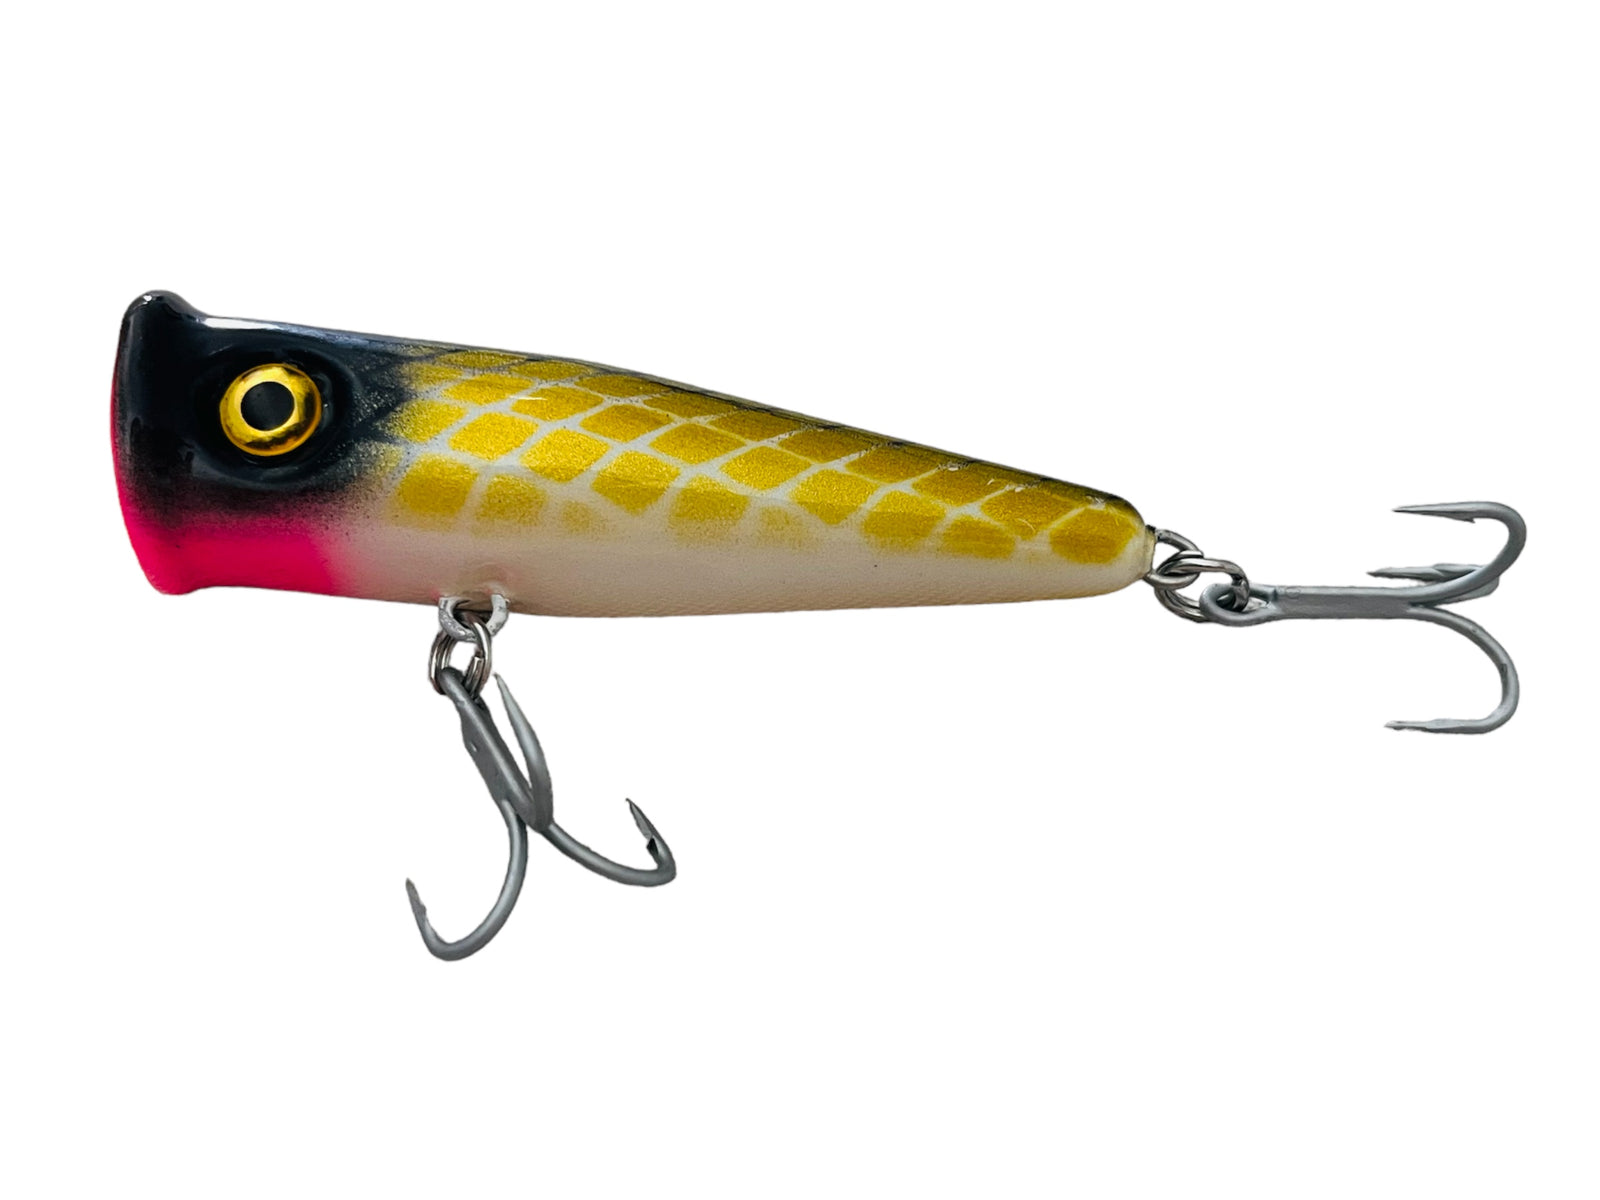 Eyecon 115 Shallow - 115mm Handcrafted Timber Fishing Lure - Old